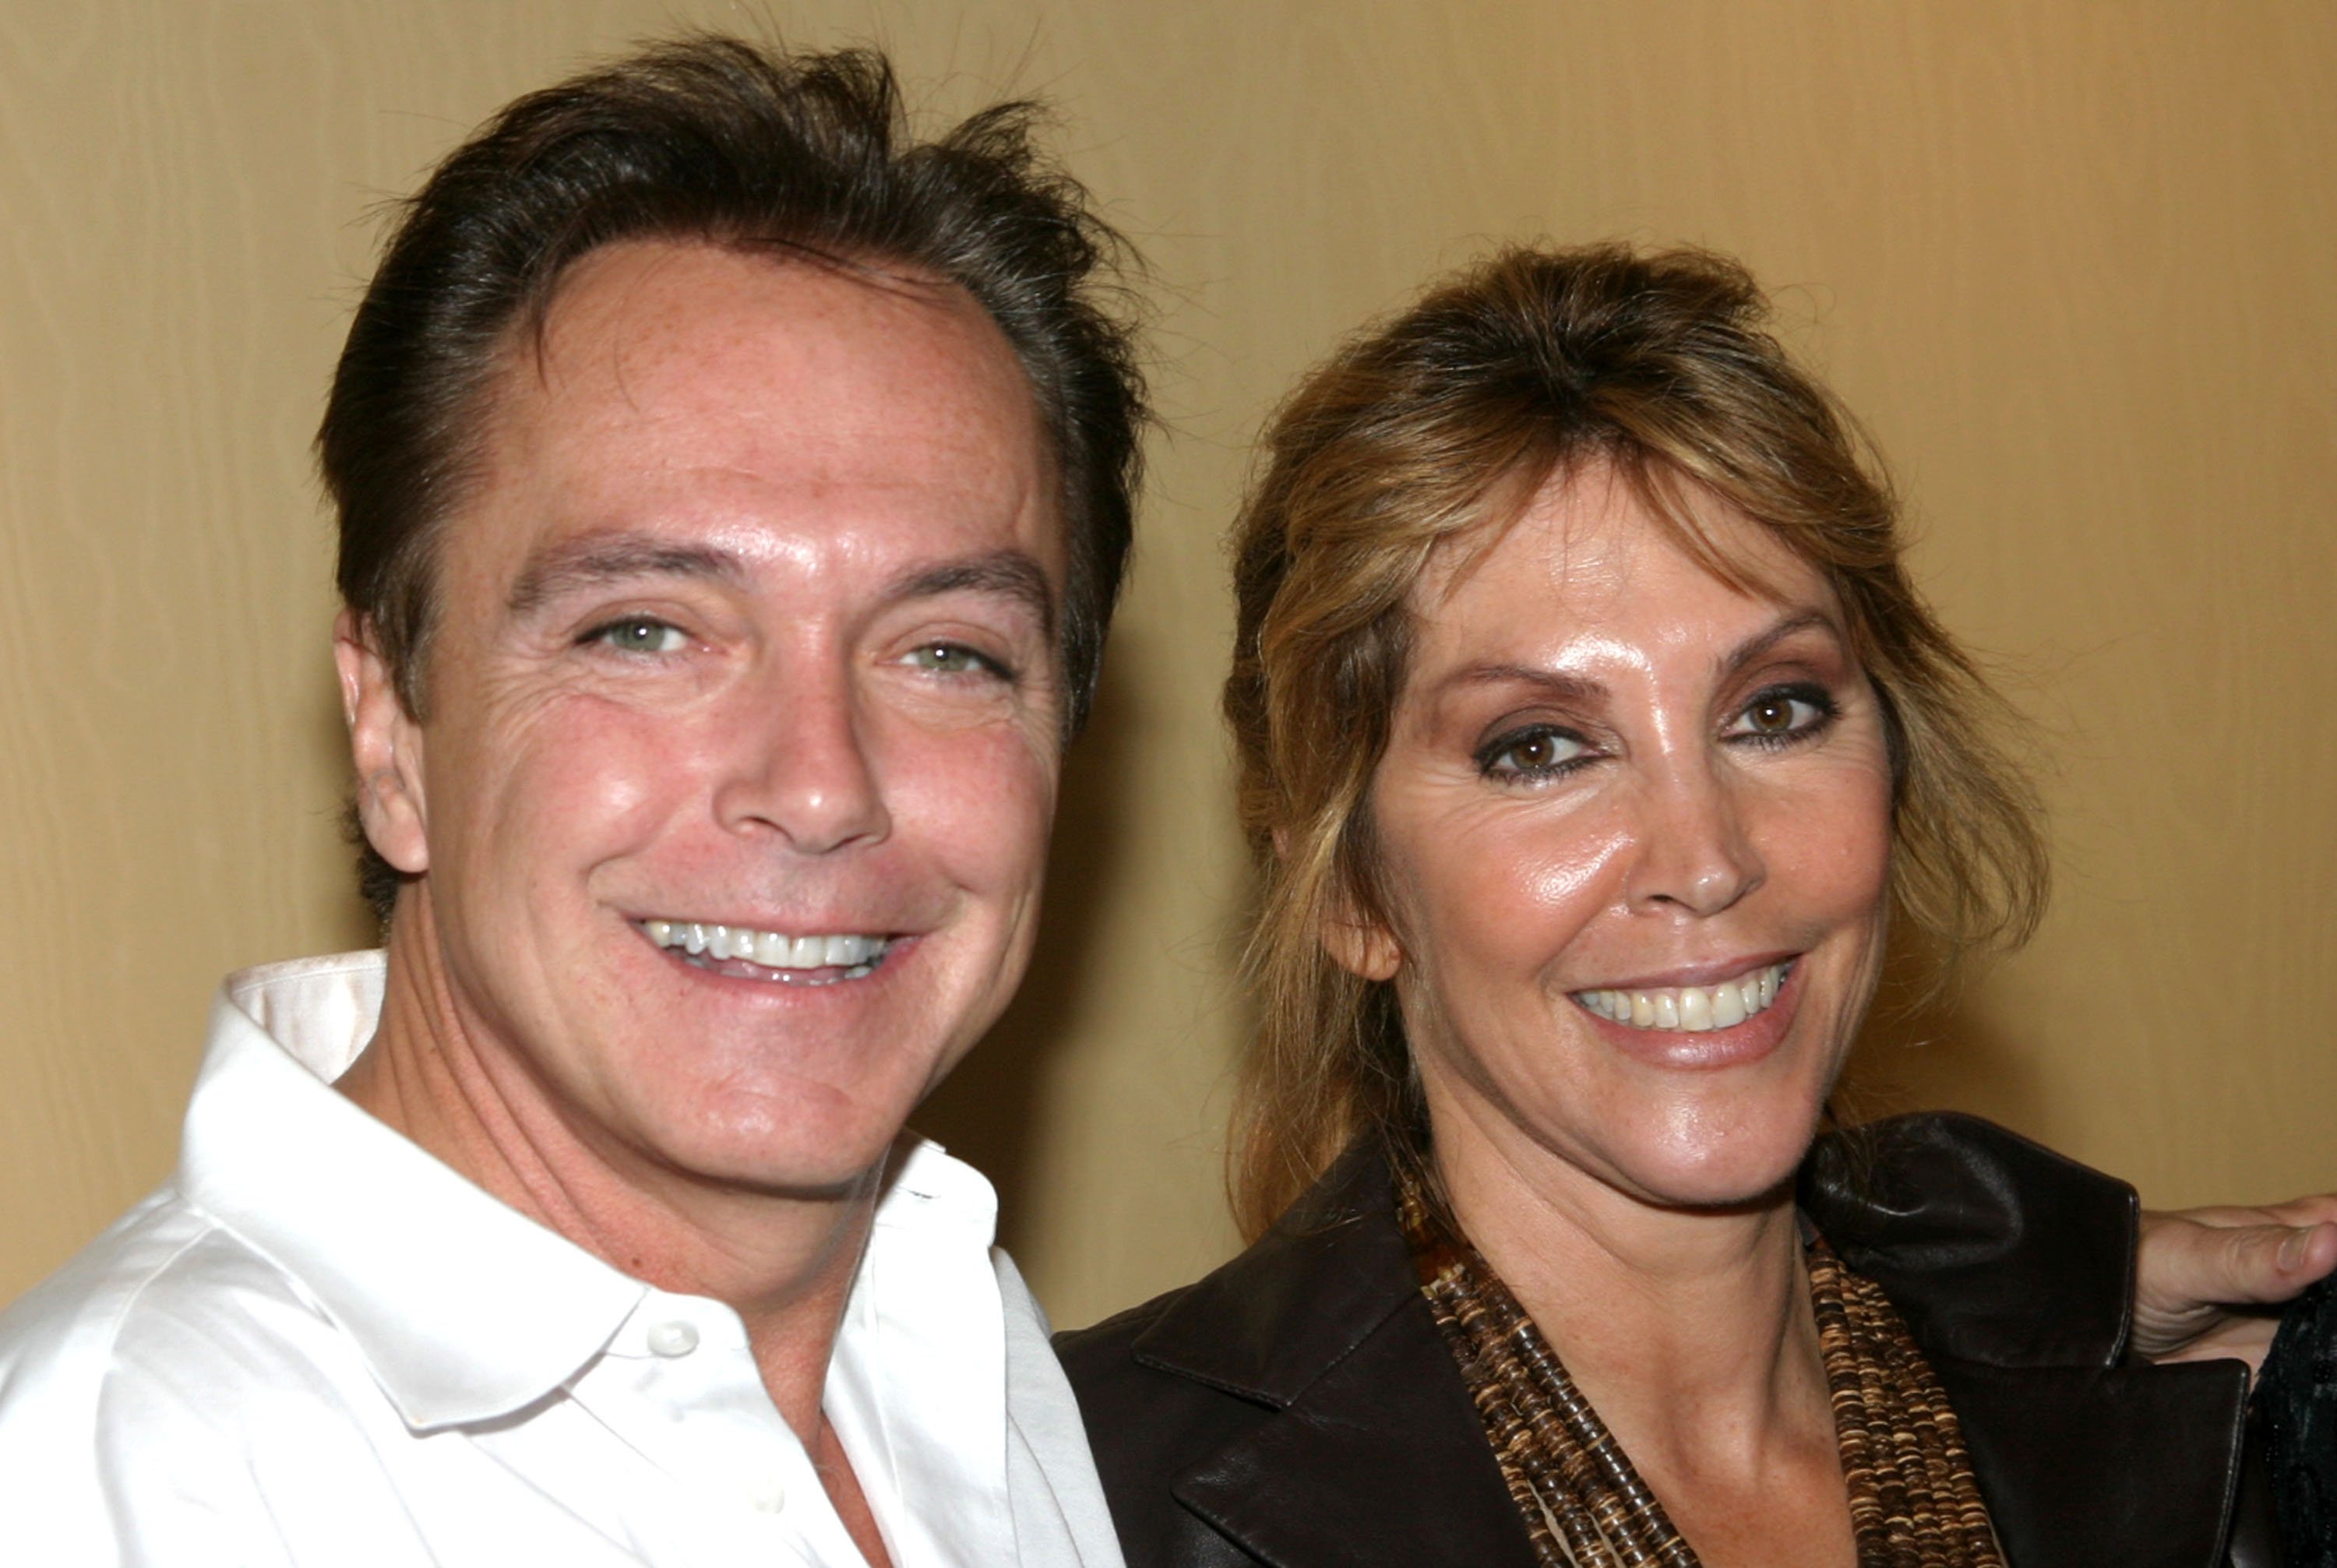 David Cassidy and his wife Sue Shifrin-Cassidy during David Cassidy Visits Mother Shirley Jones and Brother Patrick Cassidy Backstage at "42nd Street" on Broadway on May 15, 2004, in New York City, New York | Source: Getty Images